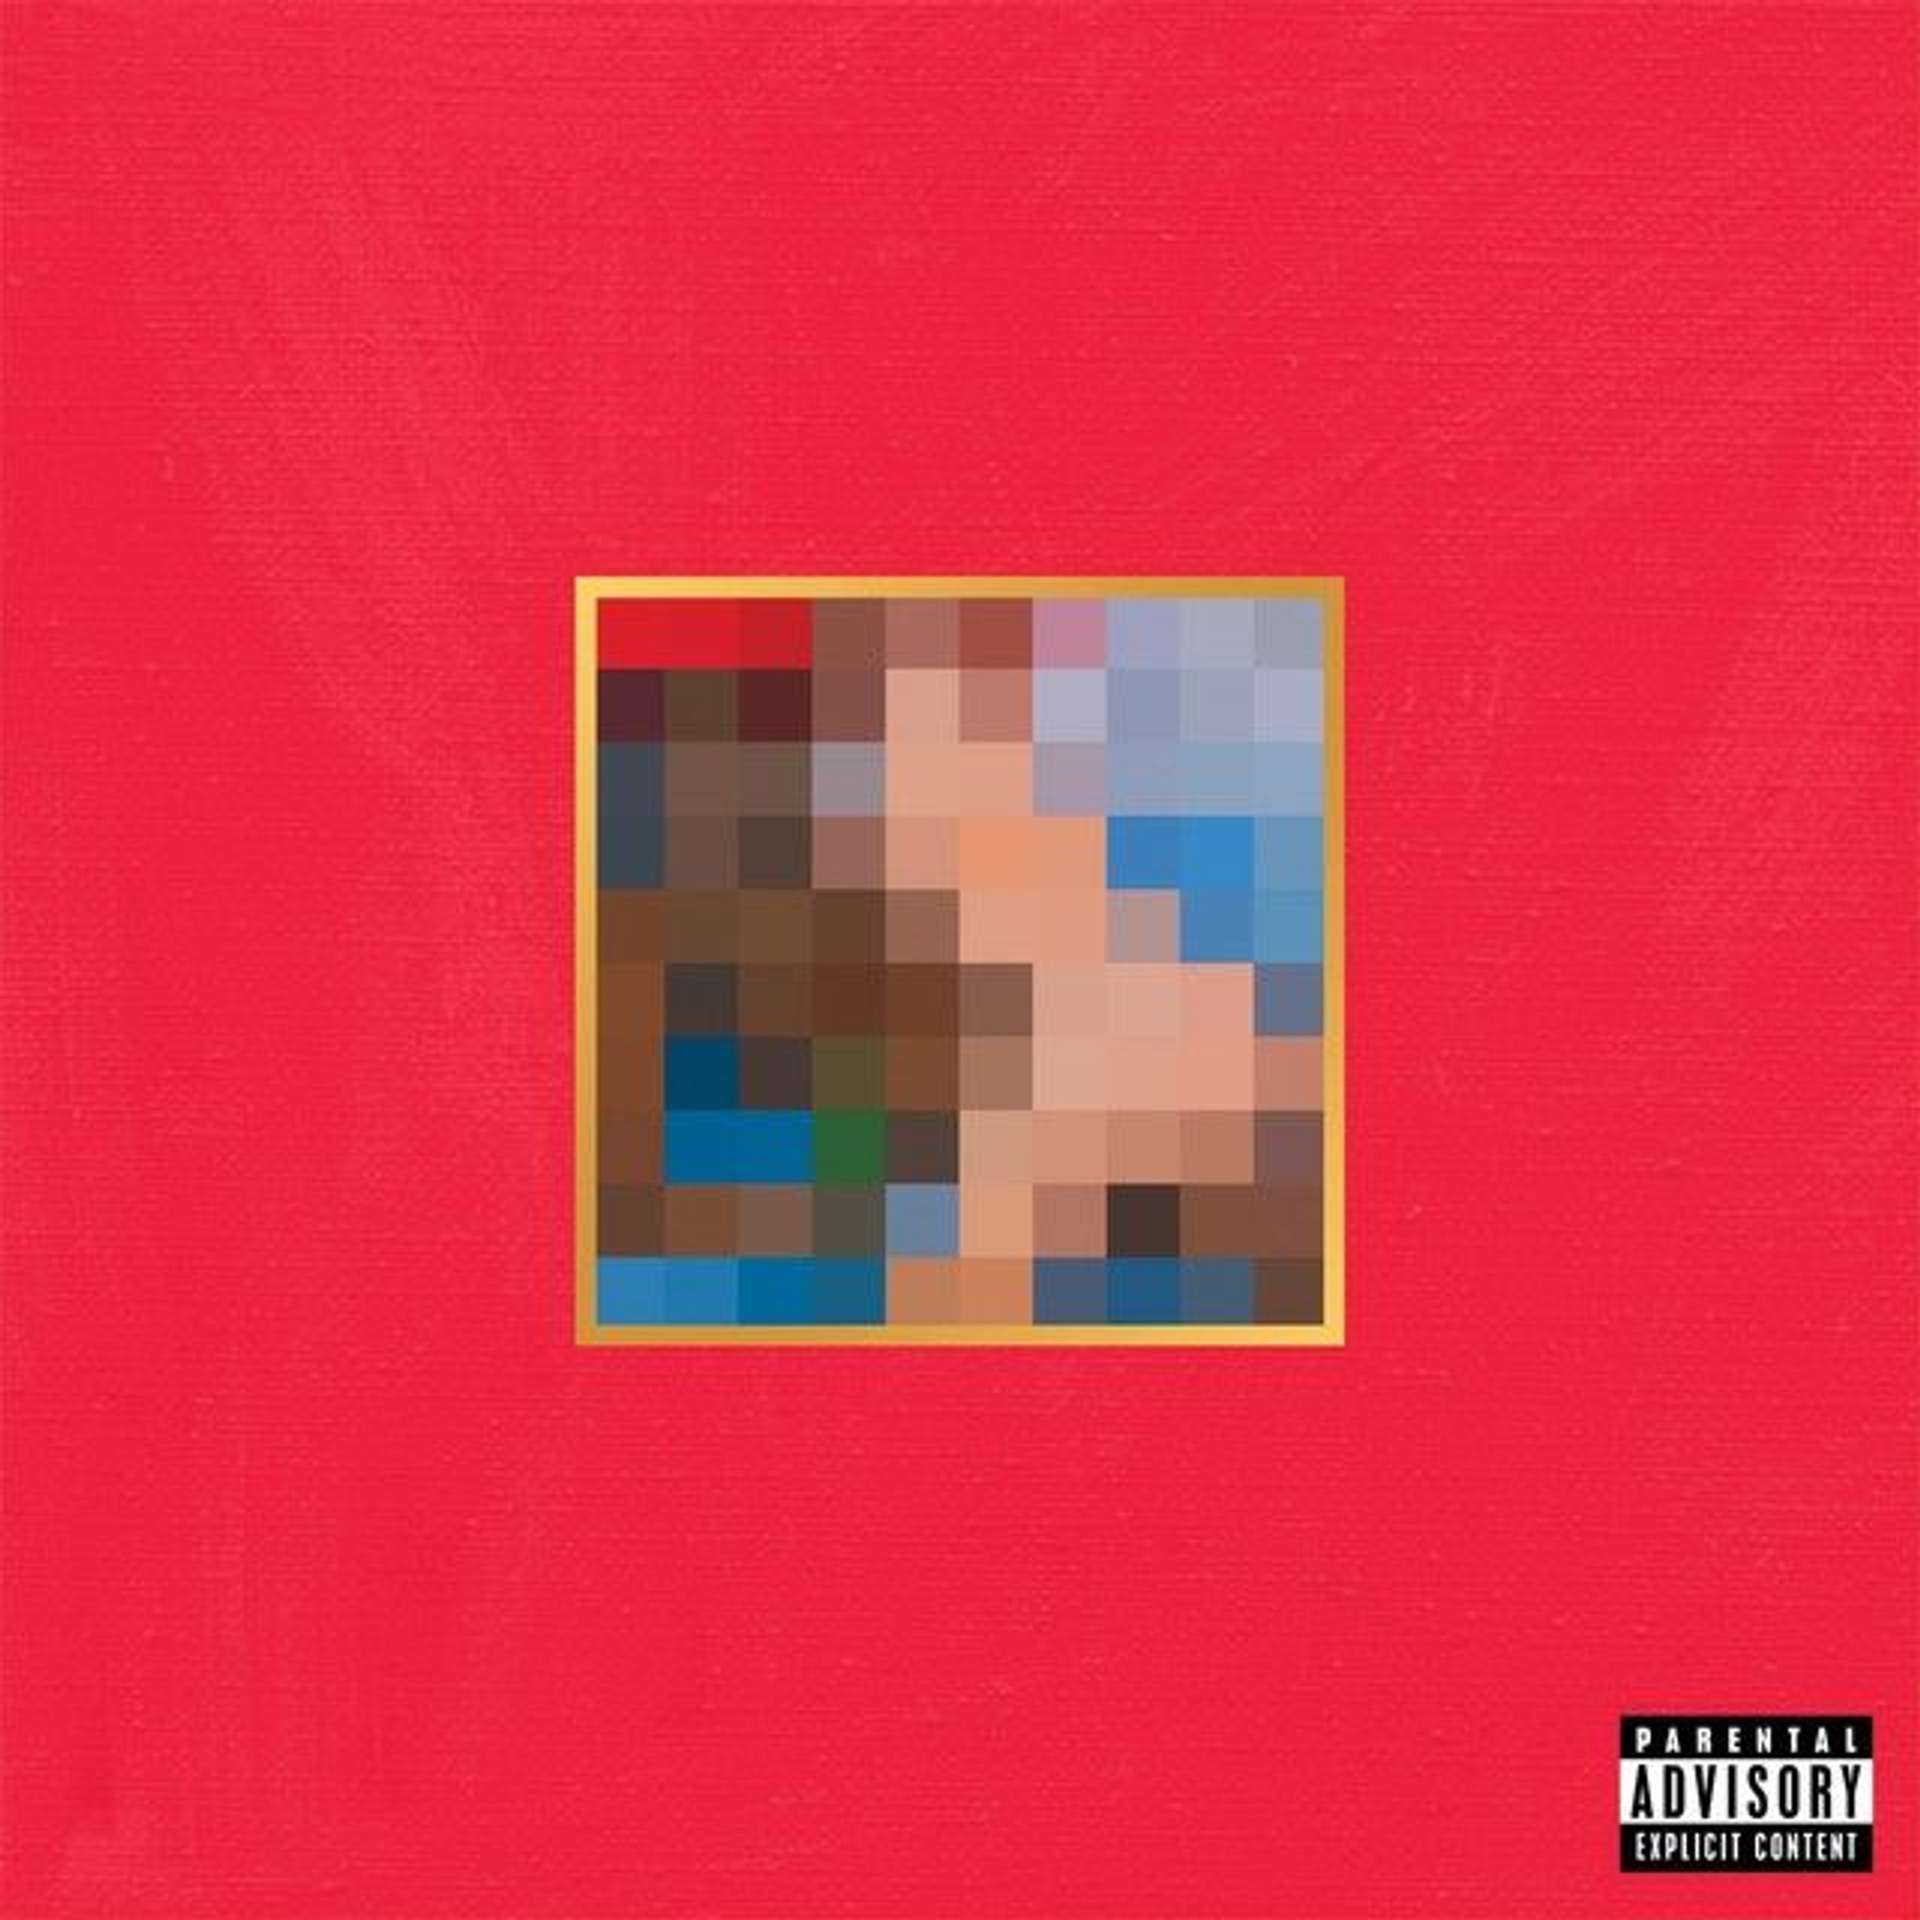 An image of the album cover for My Beautiful Dark Twisted Fantasy by George Condo, showing a pixelated square that originally depicted West being straddled by a woman against a red background.